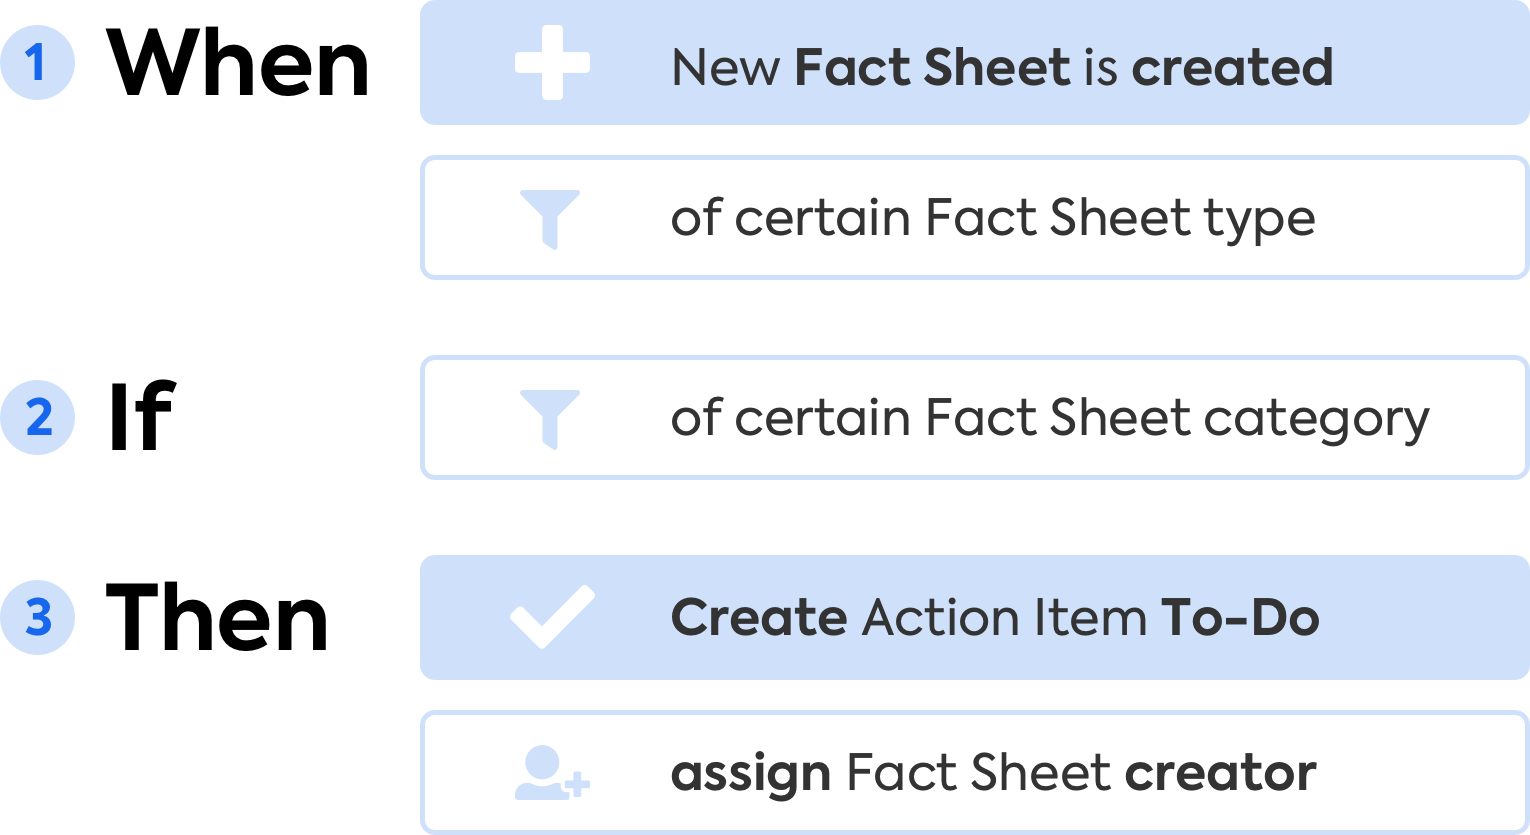 Automation: Creating an Action Item for Fact Sheet Creators on Newly Created Fact Sheets